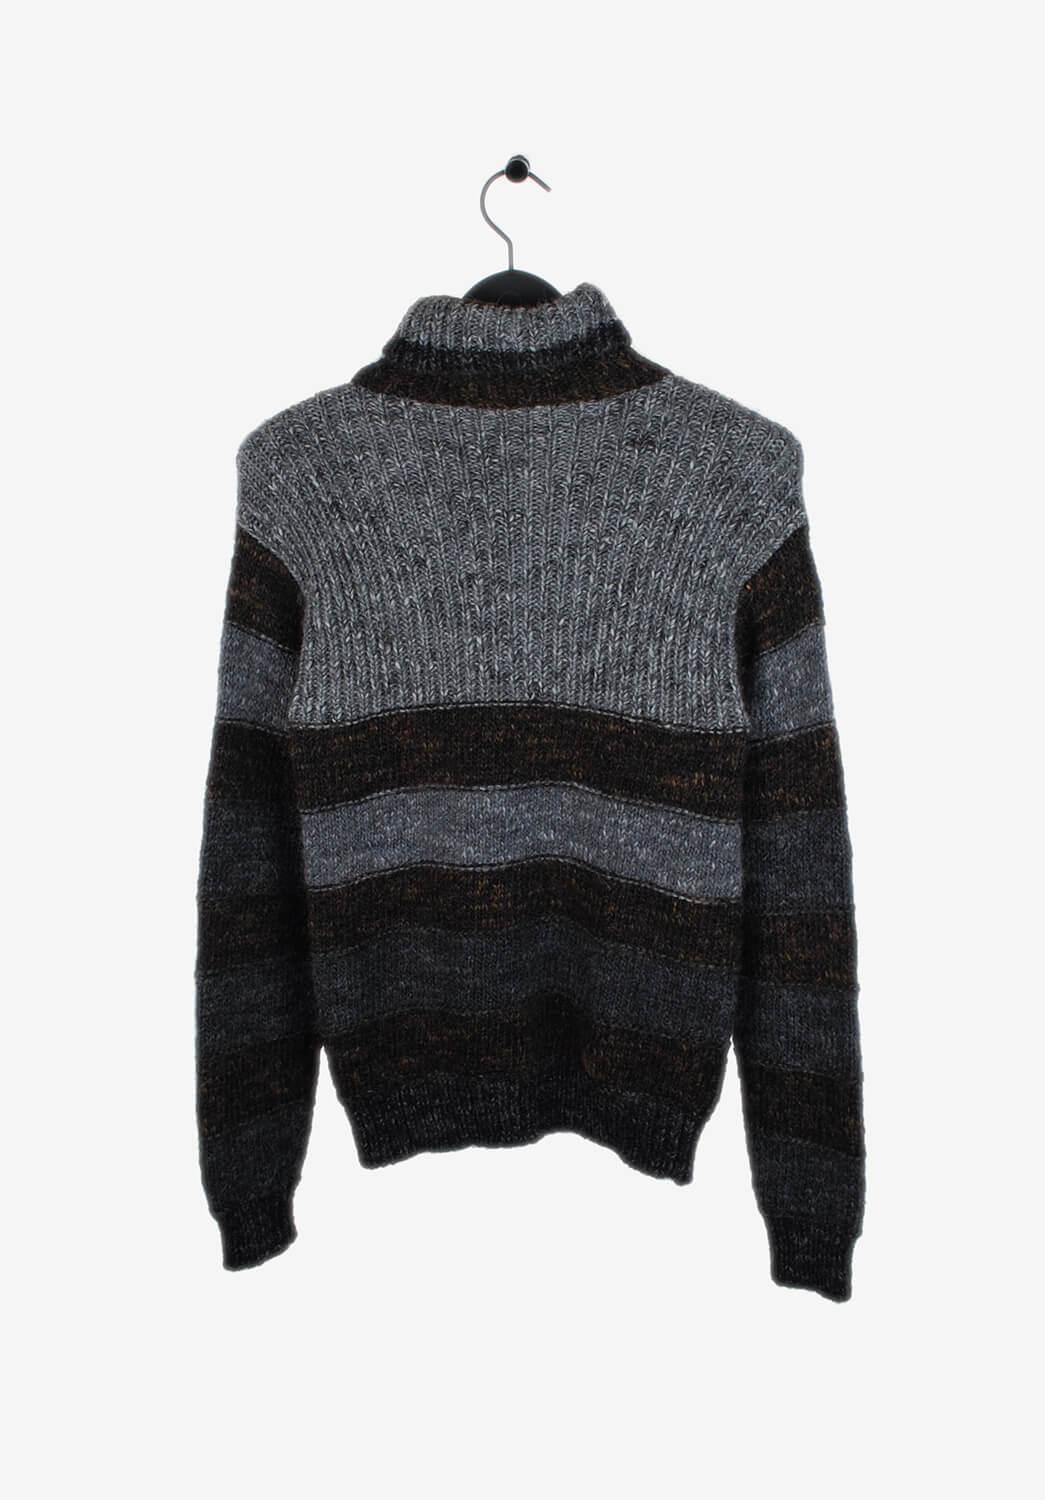 Dolce&Gabbana Turtle Neck Wool Acrylic Knit Men Sweater Size 50IT(Slim M) In Excellent Condition For Sale In Kaunas, LT